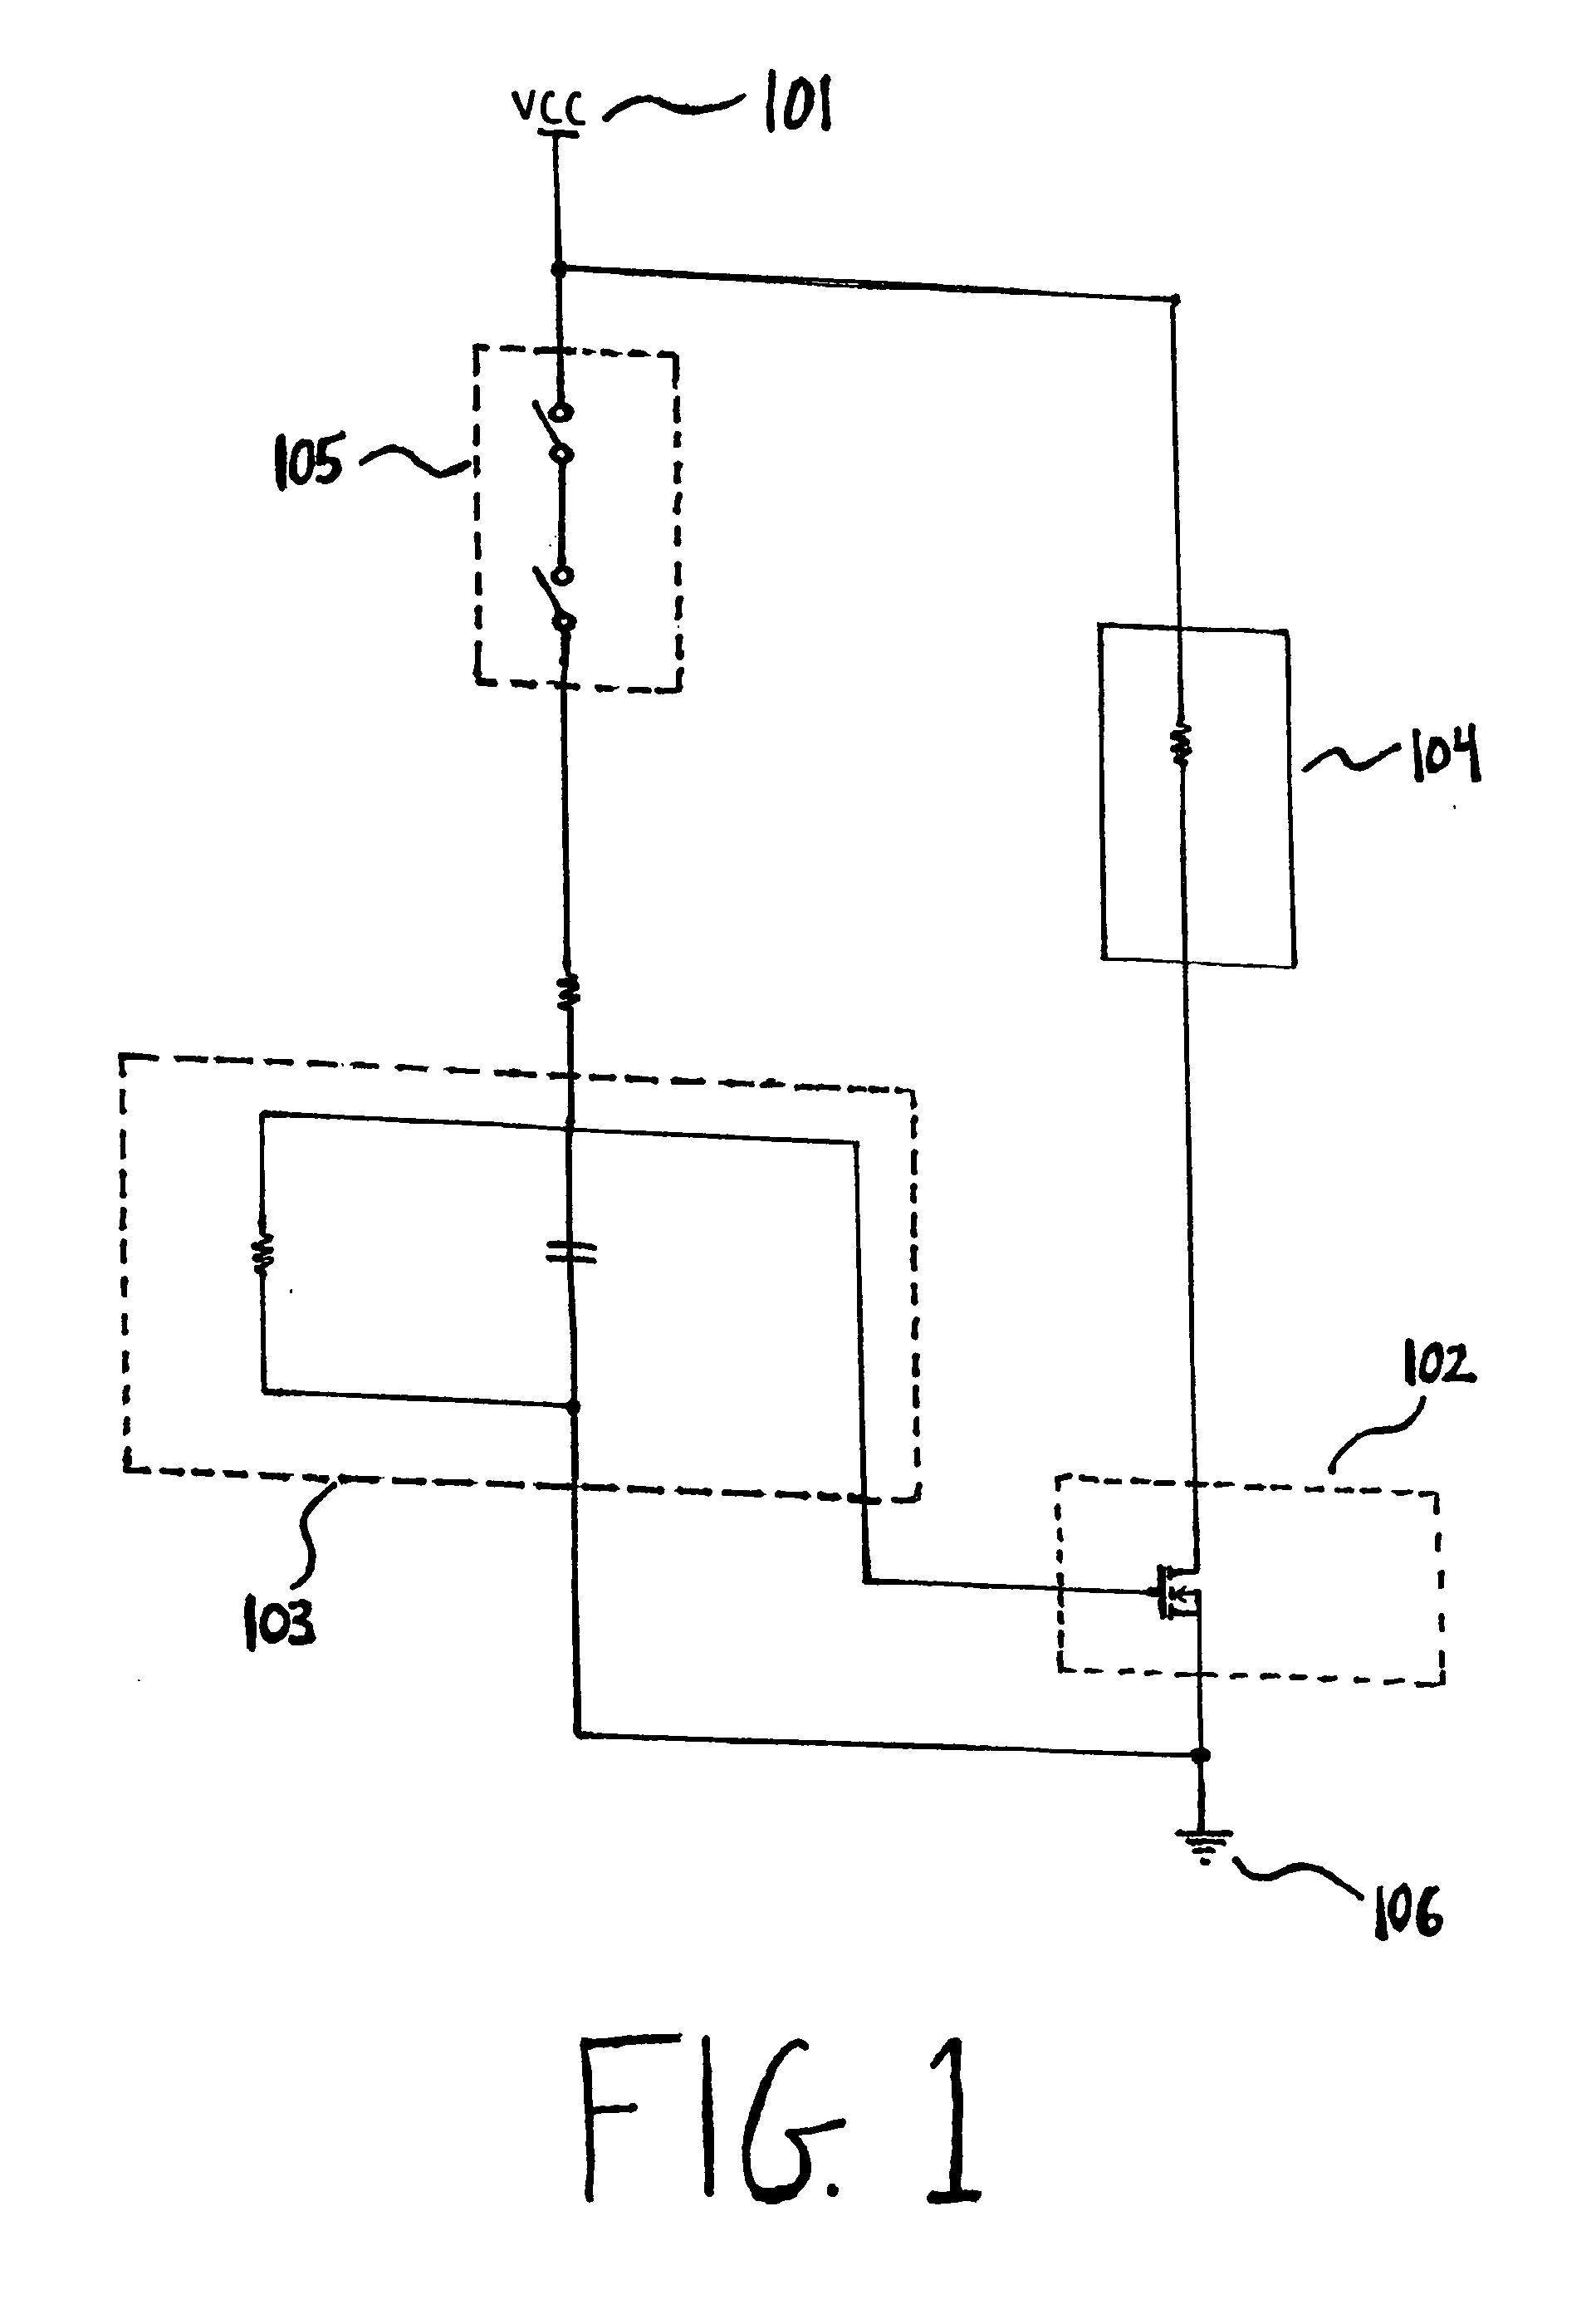 False activation reducing centrifugal activation system